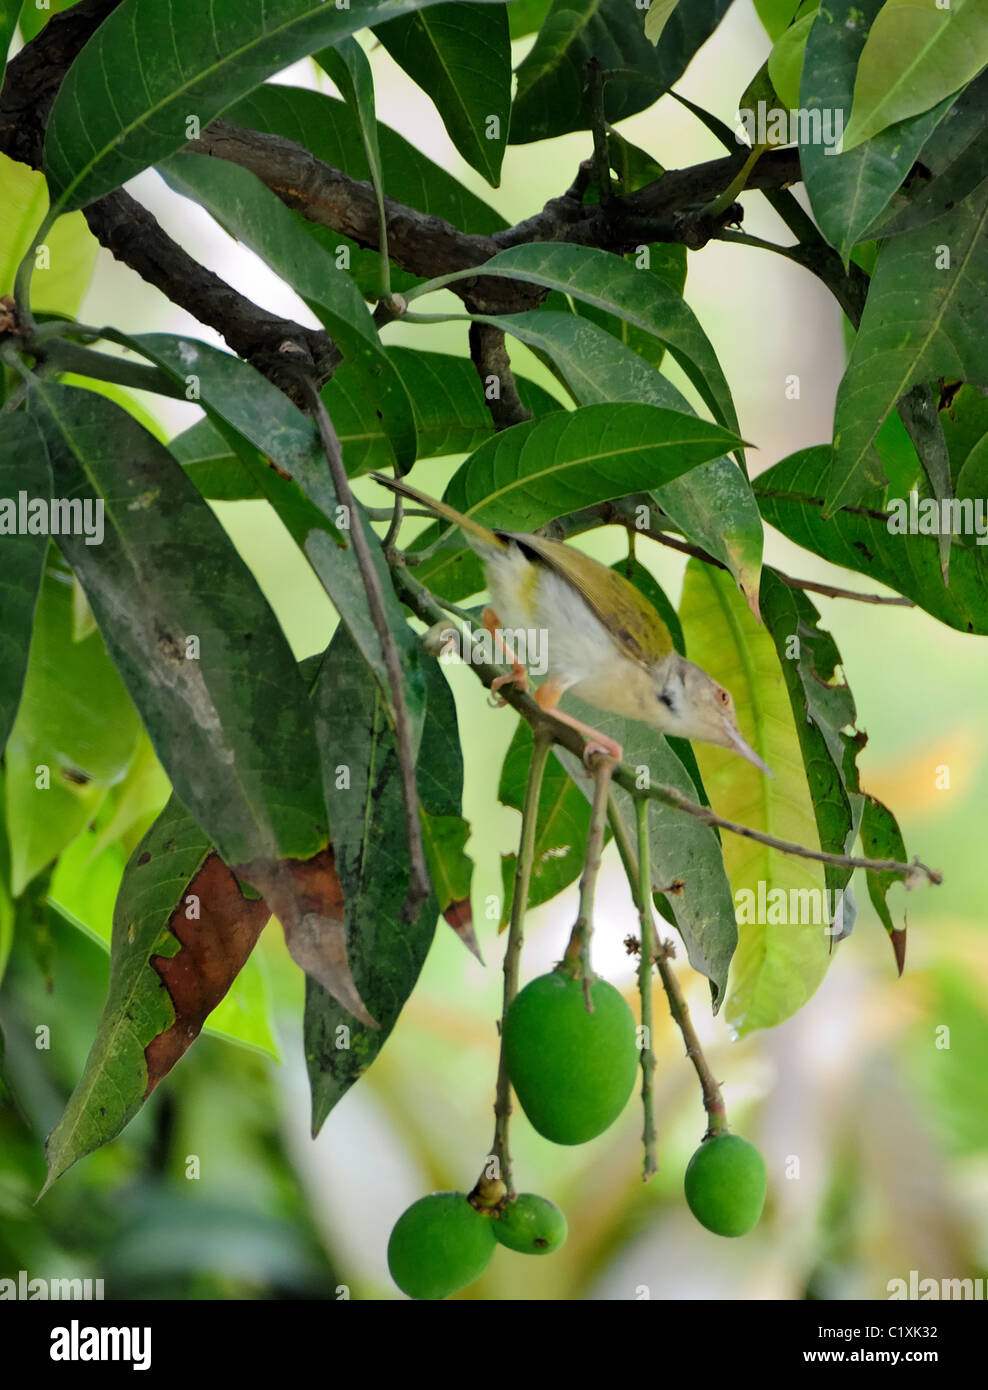 A tailor bird, Orthotomus sutorius, on a mango tree branch with green mangoes with copy space Stock Photo